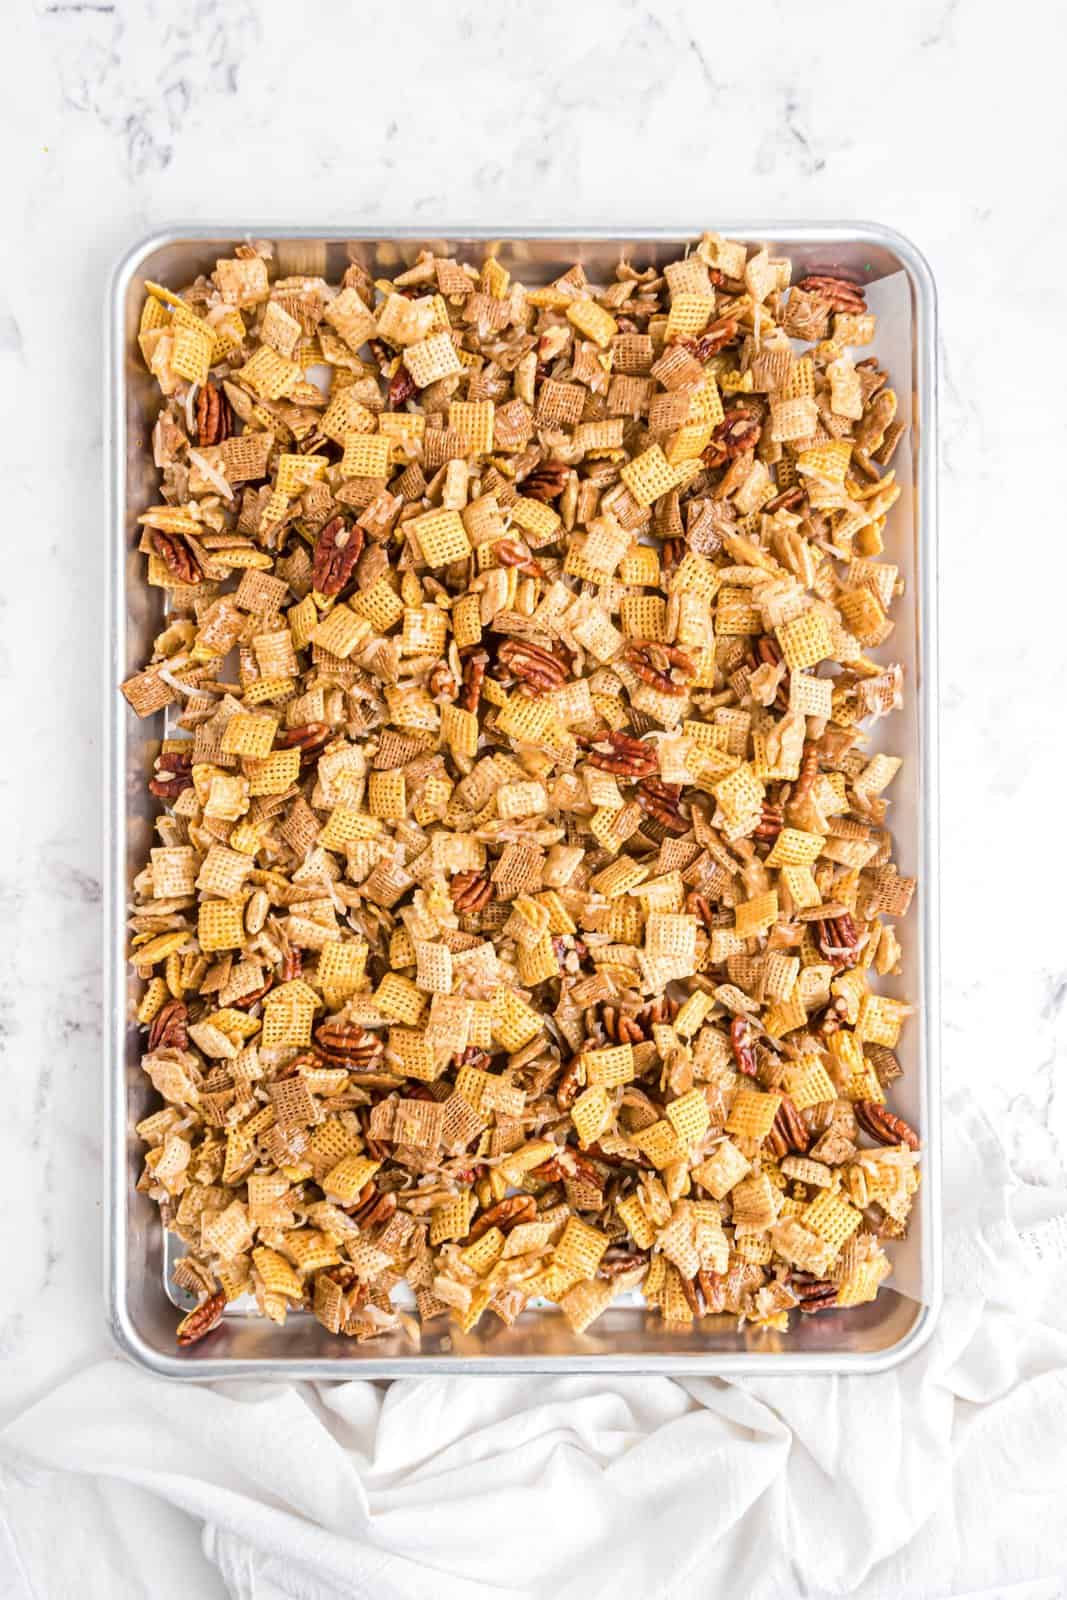 Chex mixture spread over parchment lined pan.